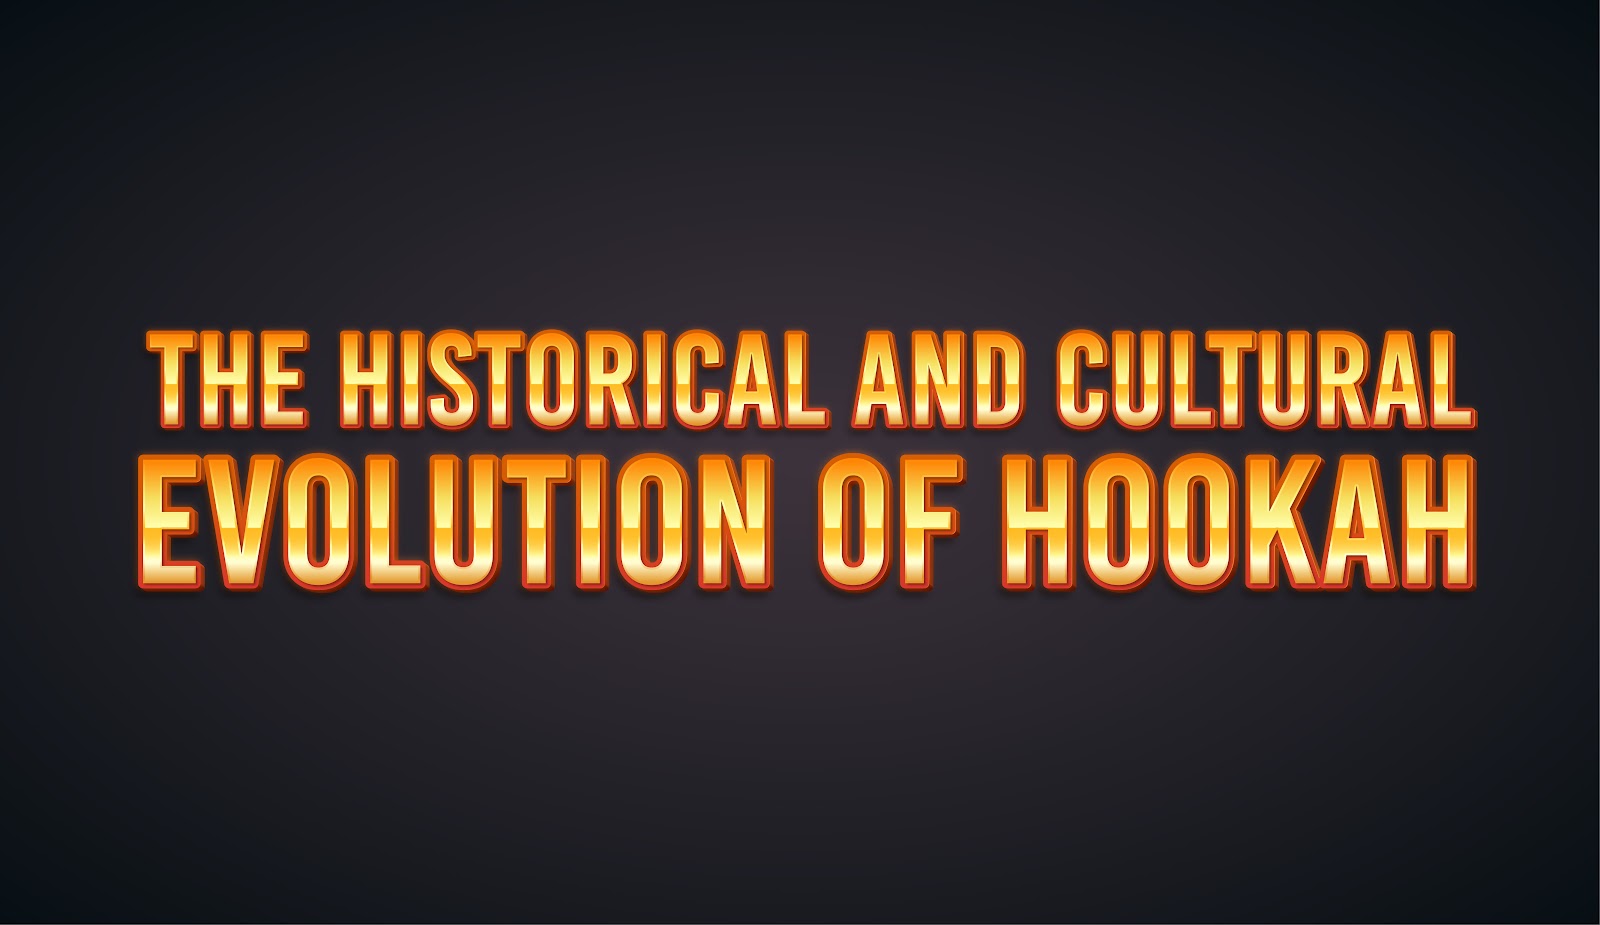 The Historical and Cultural Evolution of Hookah